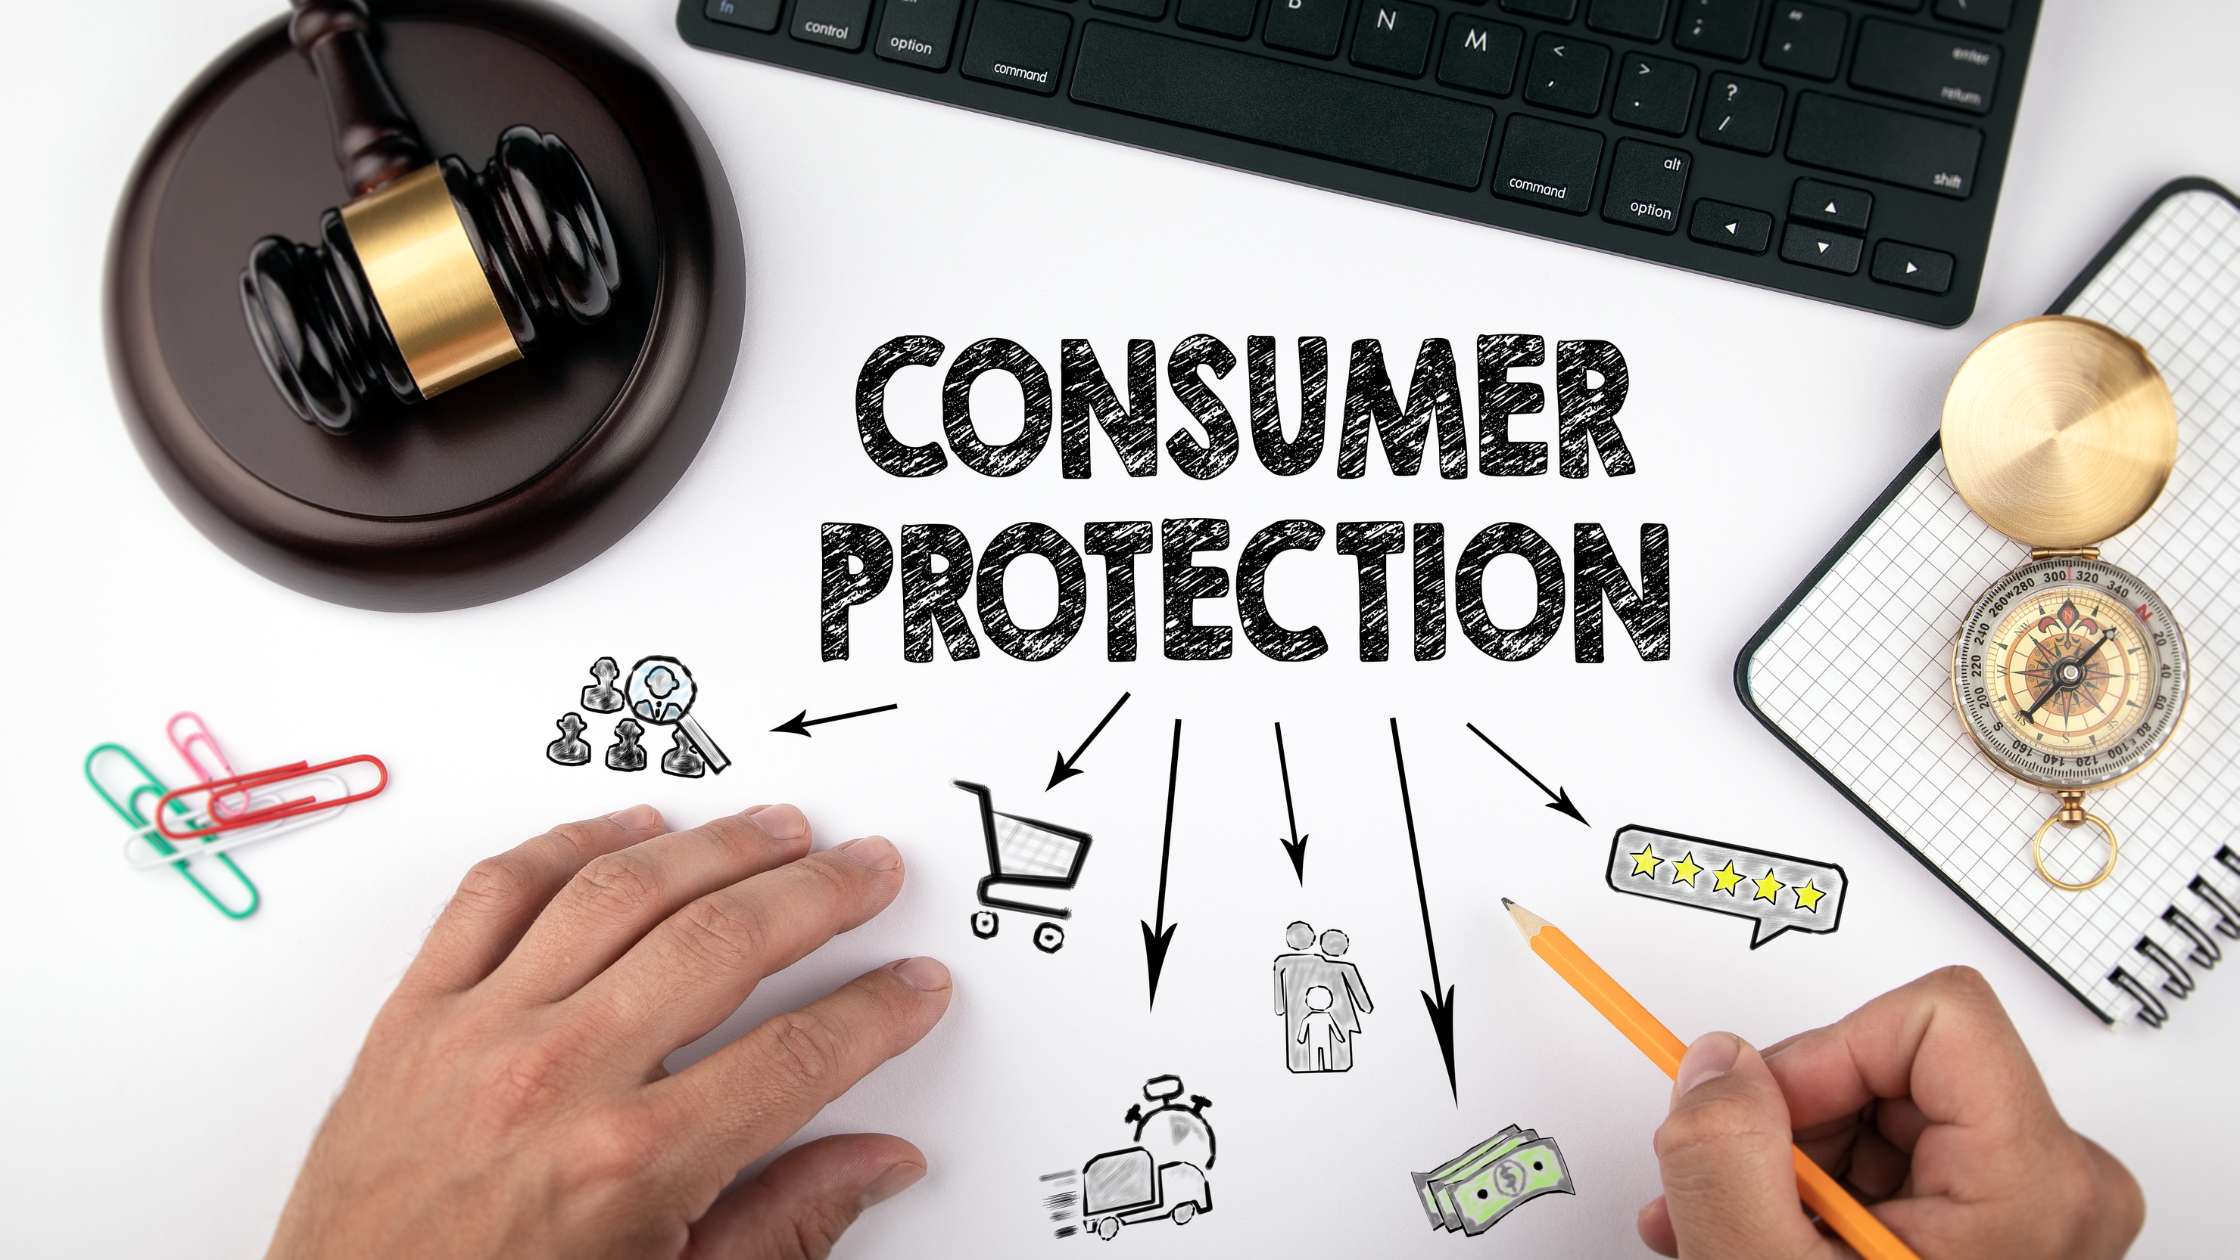 Thailand’s Consumer Protection Act